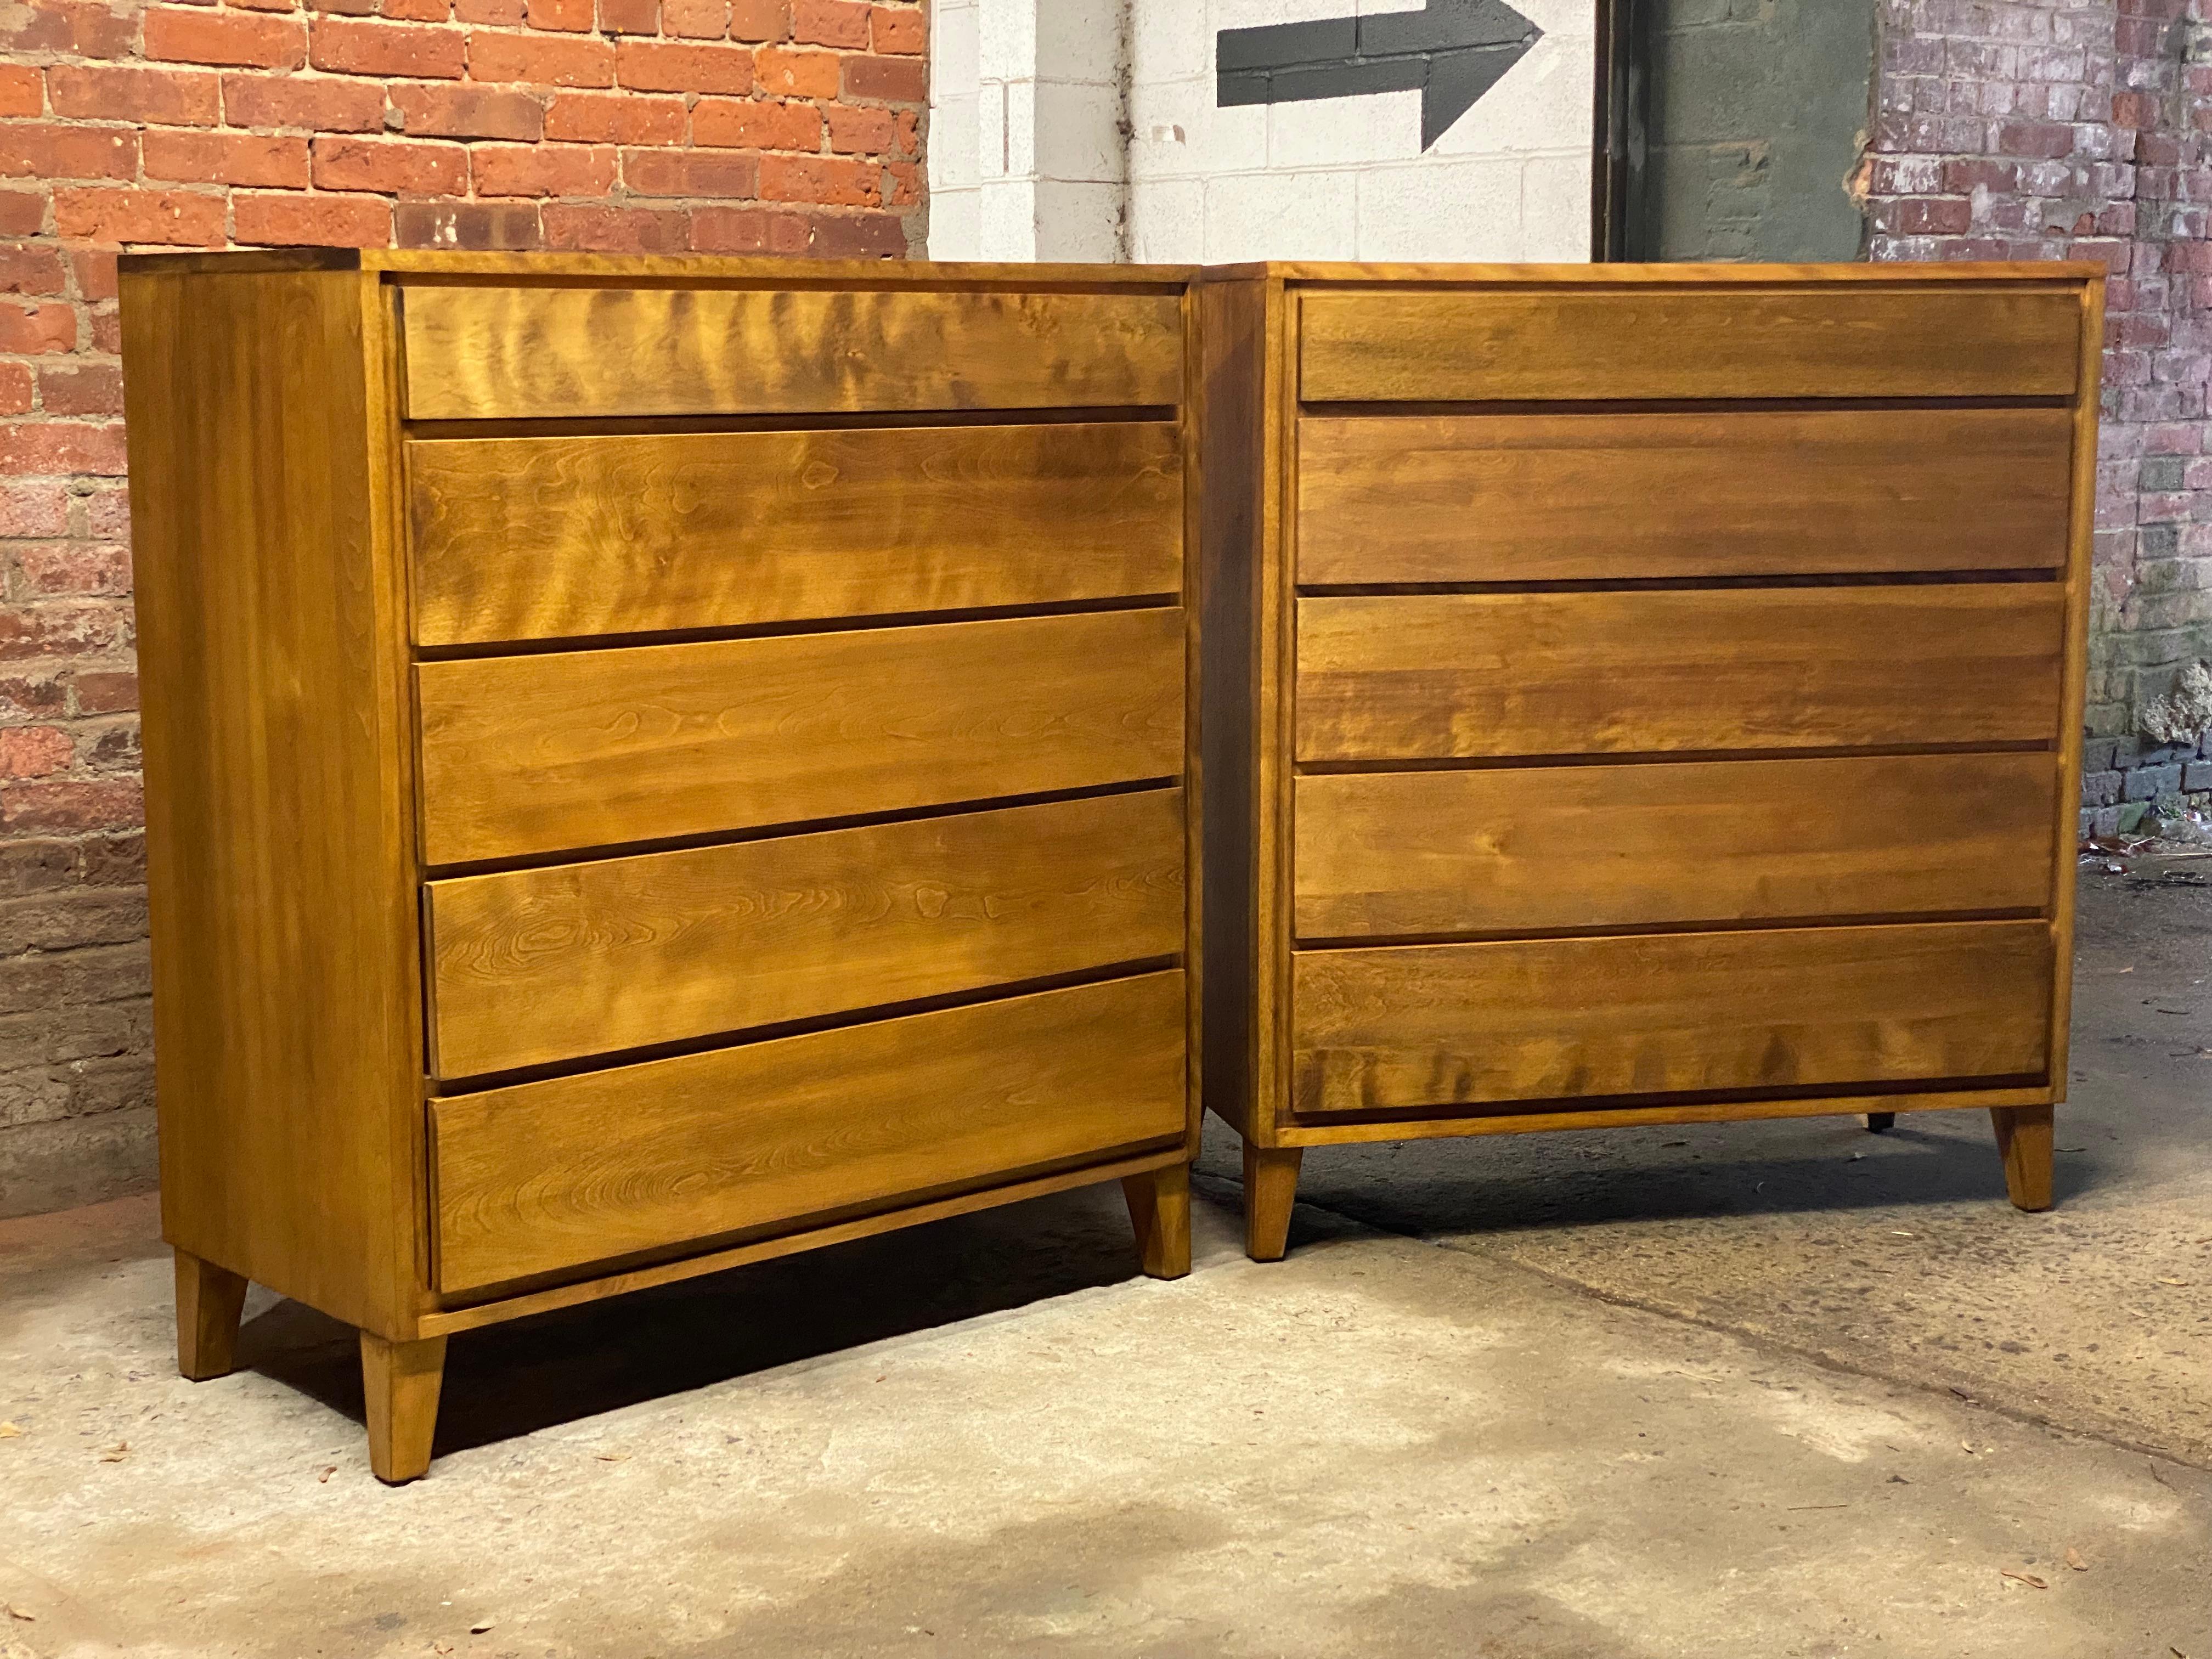 Leslie Diamond for Conant Ball American Modern Dresser, A Pair In Good Condition For Sale In Garnerville, NY